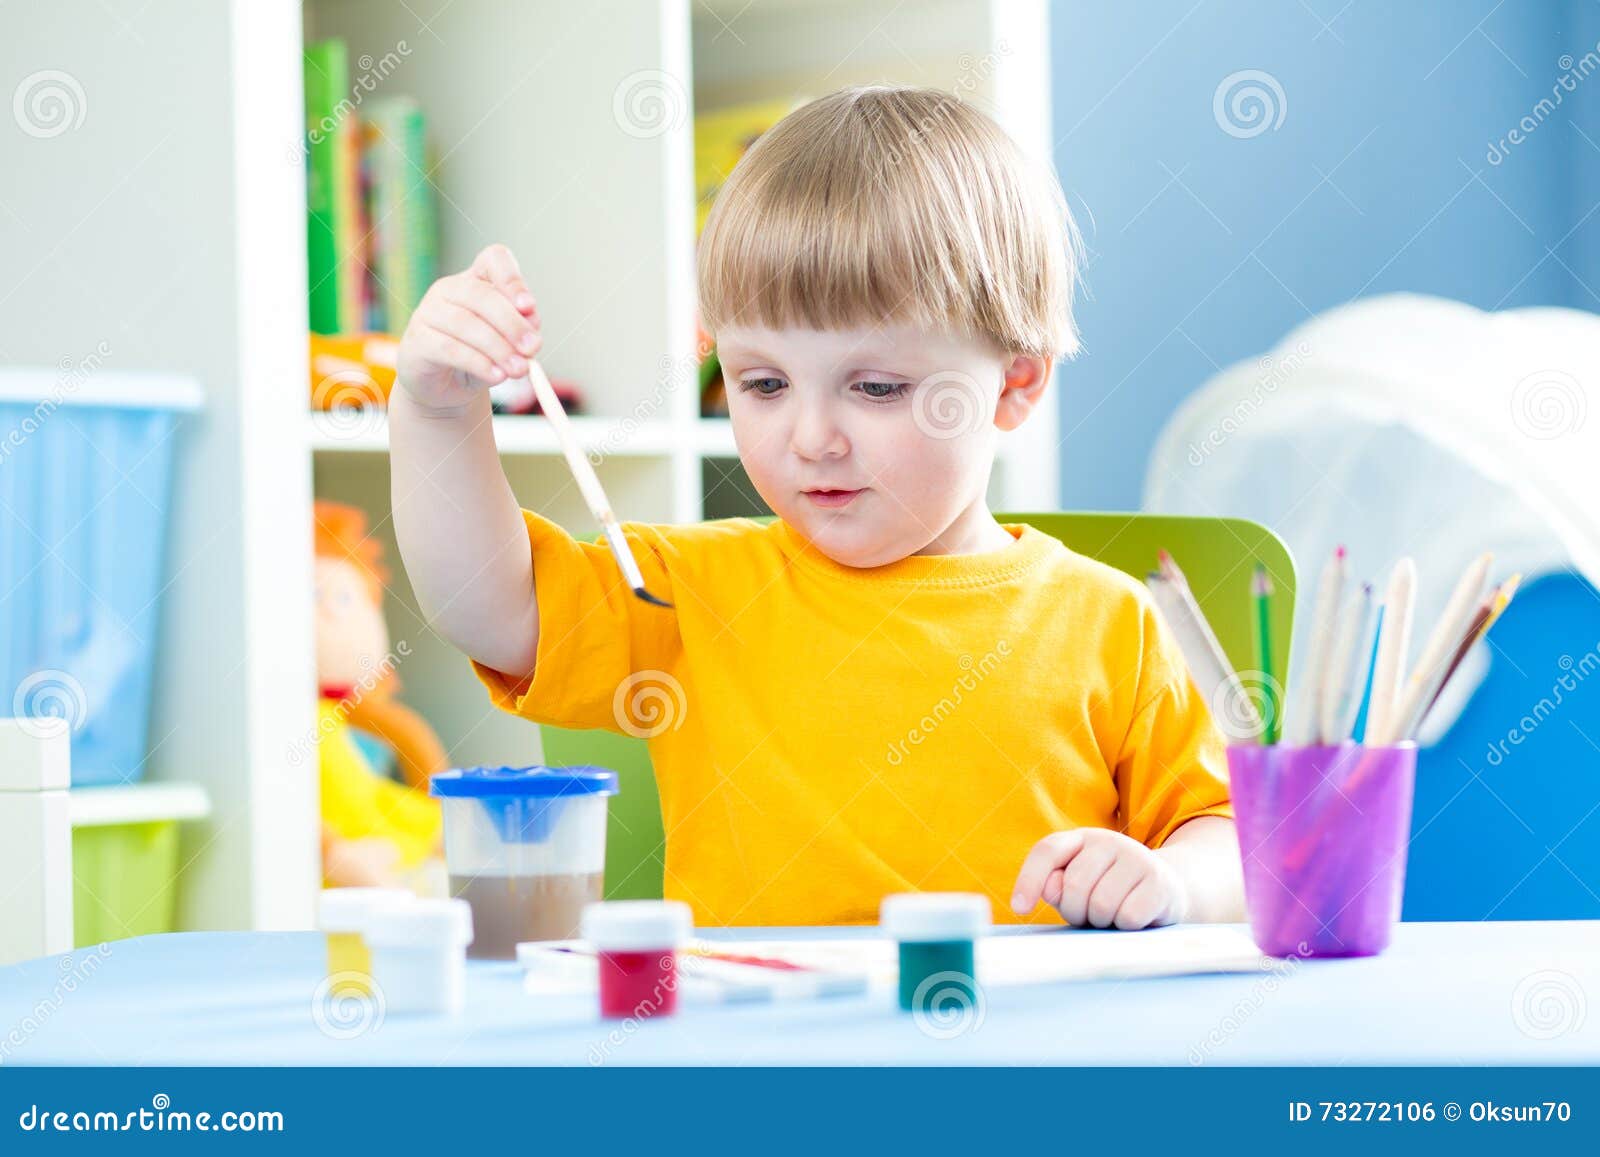 kid playing and painting at home or kindergarten or playschool